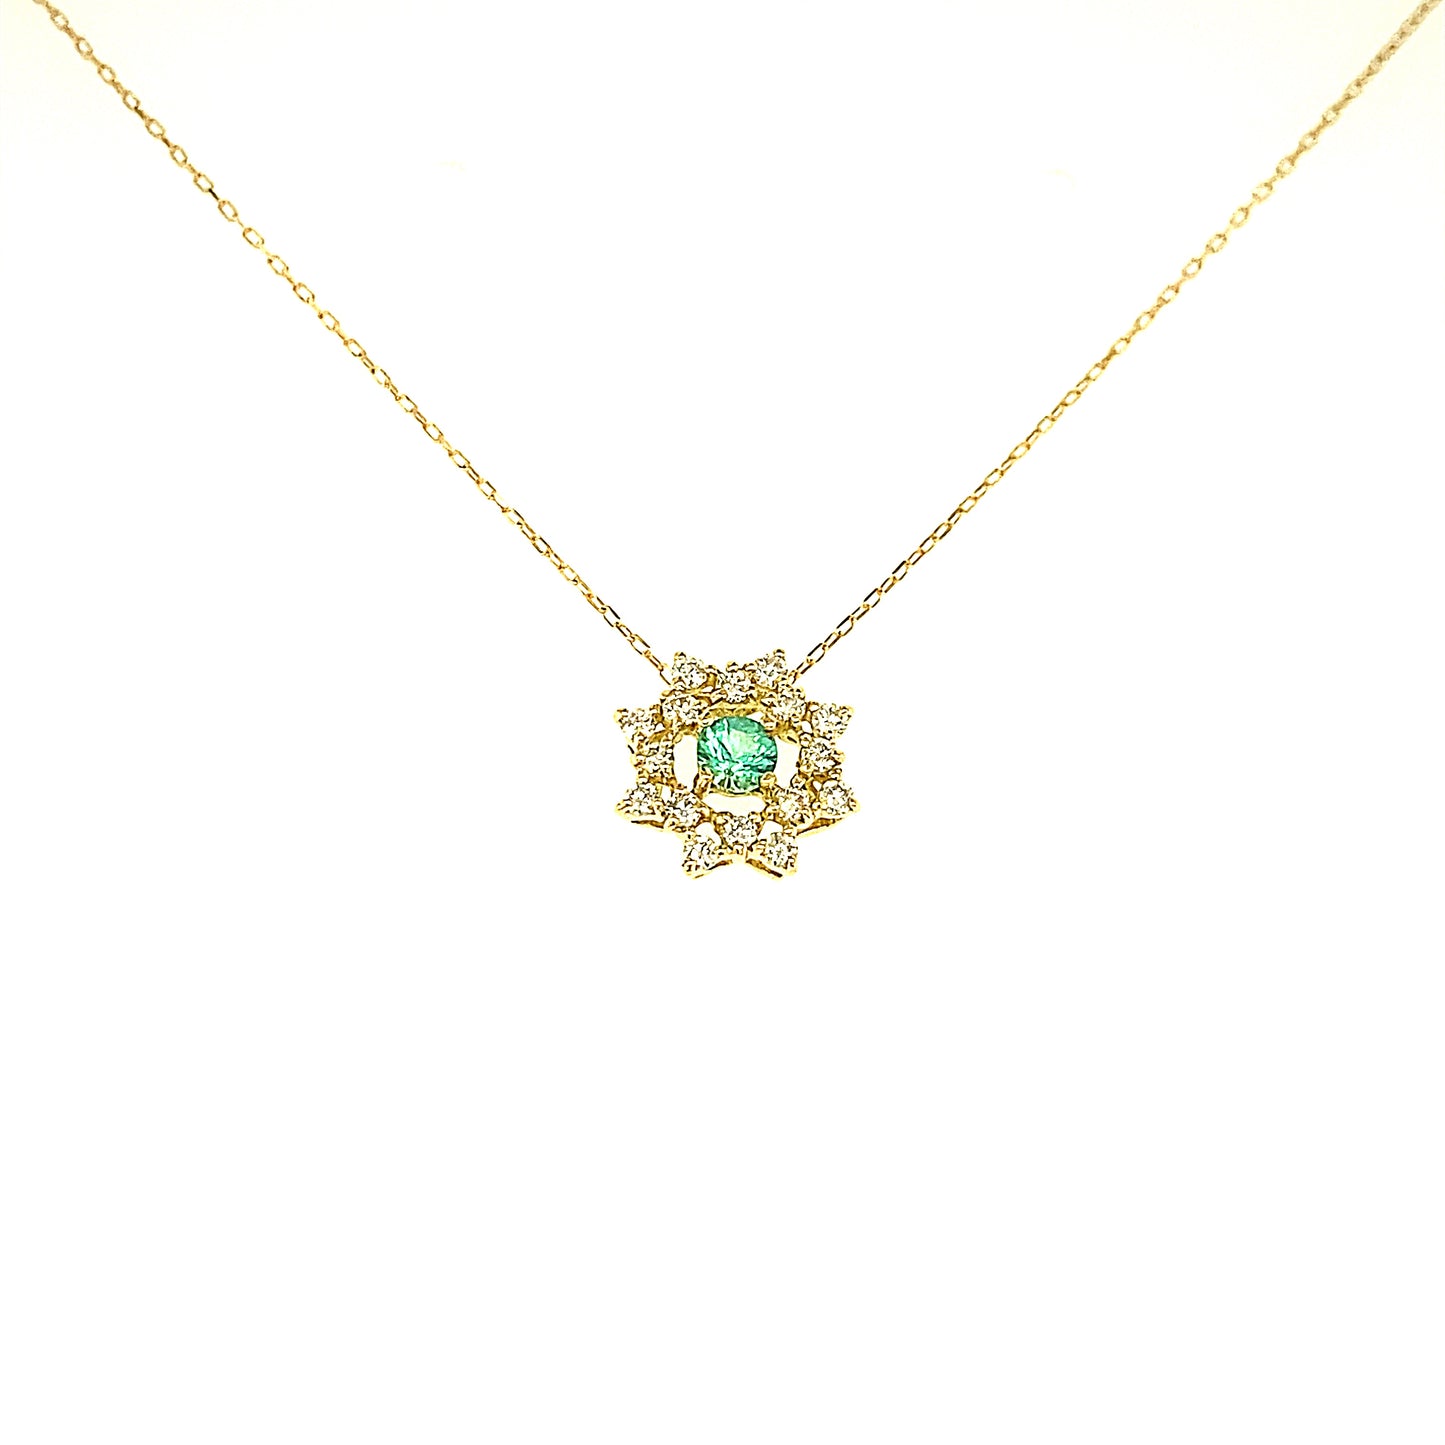 Flower Birthstone Necklace 0.16ct (May - Emerald)